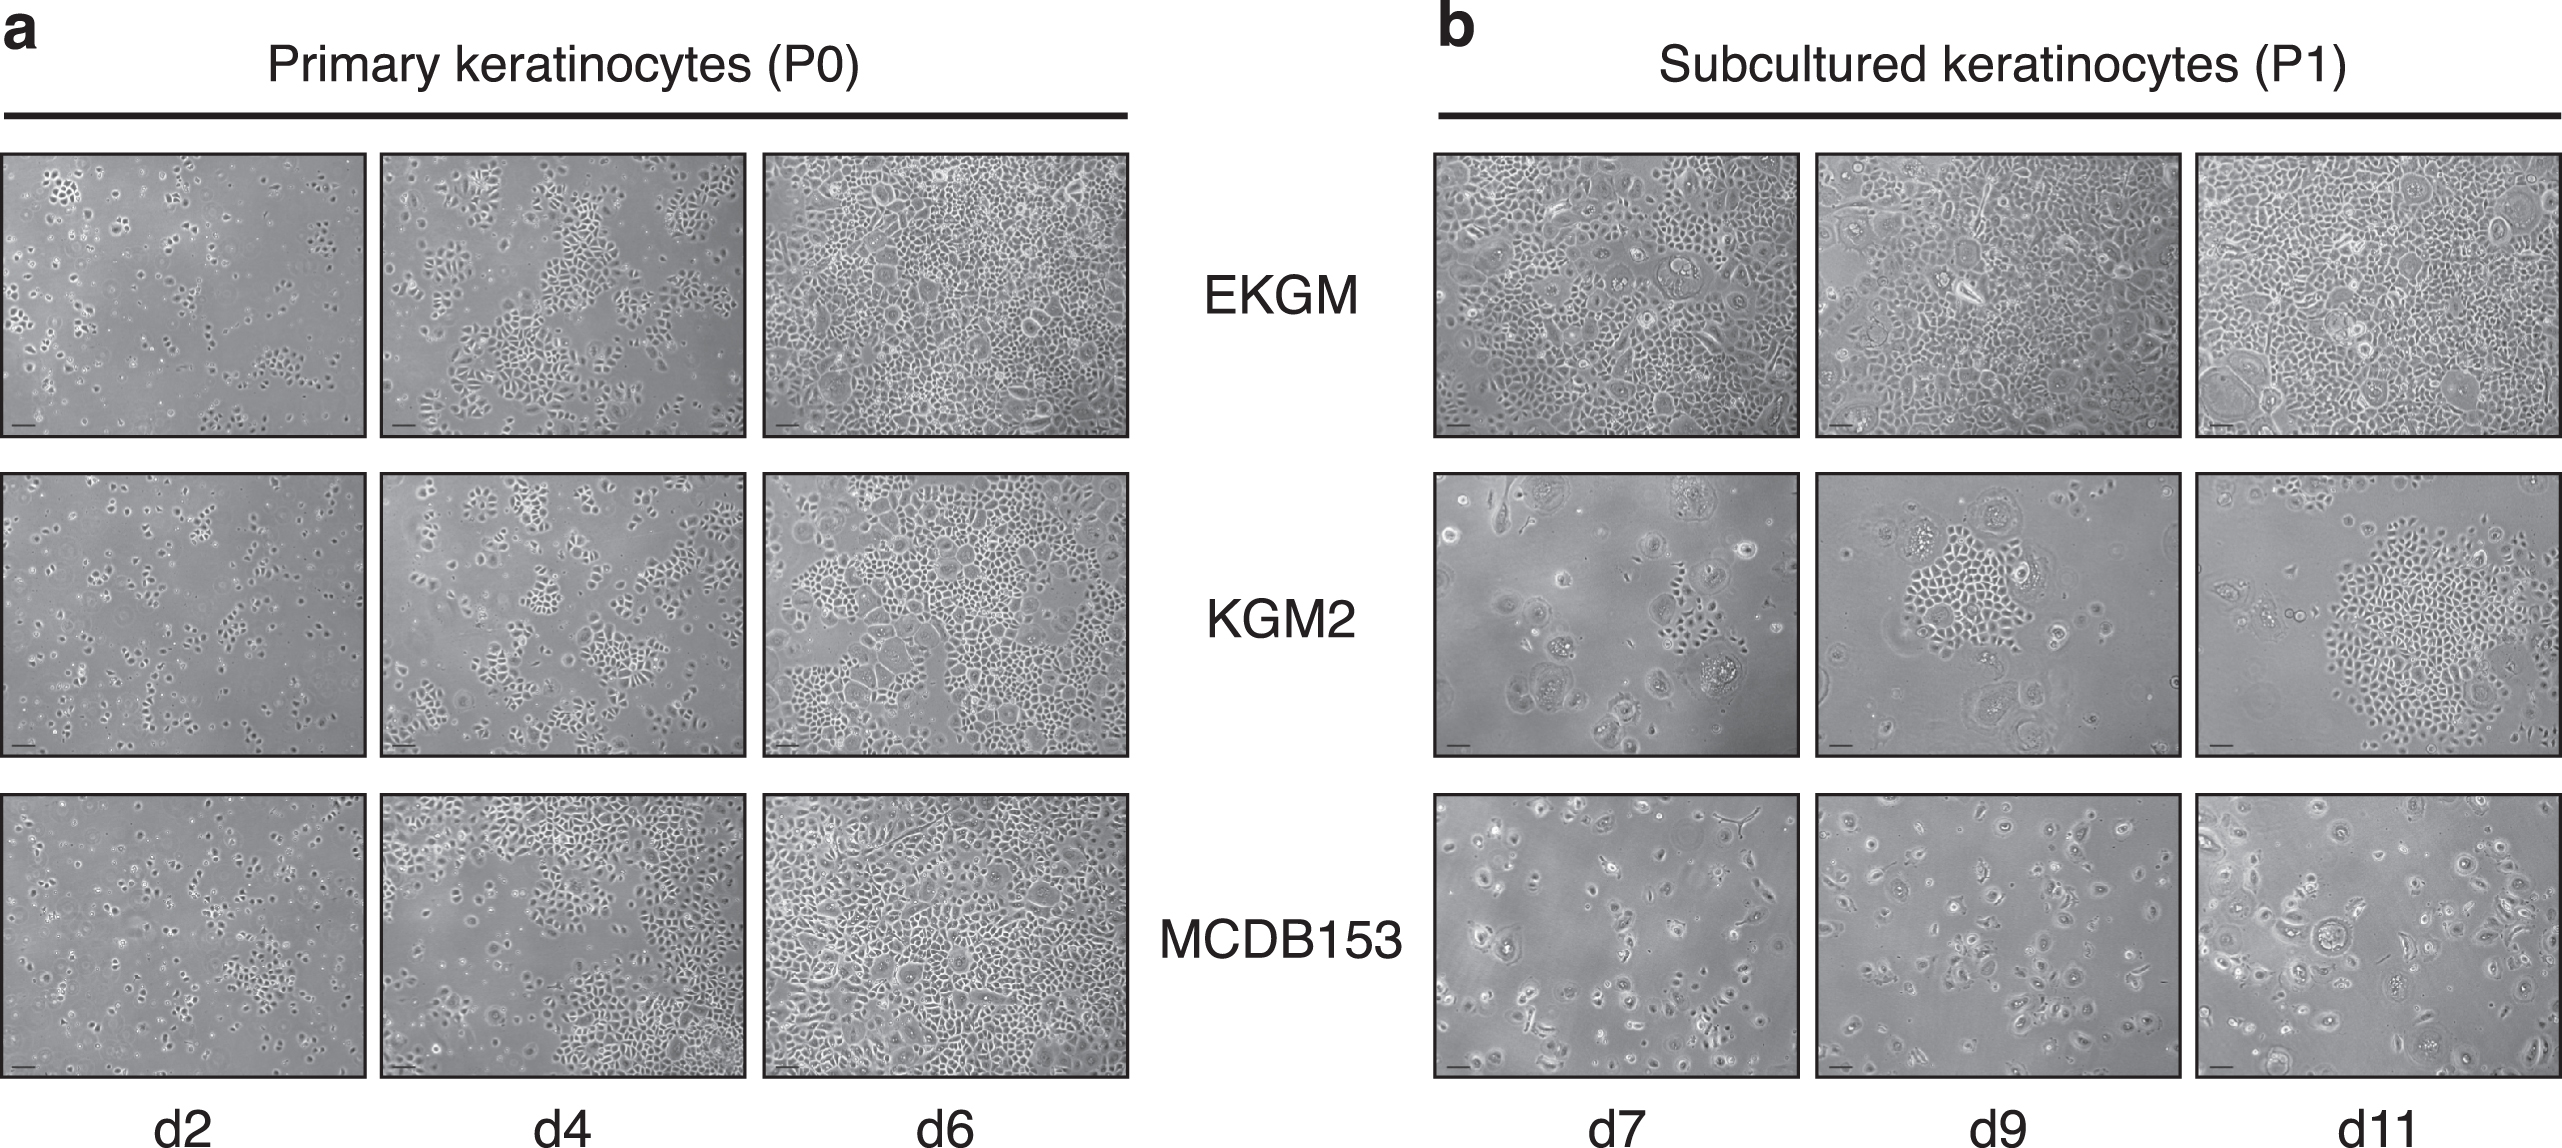 Comparison of different culture media on porcine keratinocyte growth and proliferation. Phase contrast images show in (a) primary keratinocytes at days 2, 4, and 6. All media used supported primary cell growth, resulting in high confluencies at day 6. In (b), phase contrast images show secondary keratinocytes (passage 1) at days 7, 9, and 11. EKGM effectively promoted secondary cell growth, resulting in high confluency already at day 7, KGM2 promoted growth in islands without leading to a complete confluence, whereas MCDB153 did not induce significant growth at all. Keratinocytes were seeded onto collagen-coated surfaces. Scales indicate 100 μm.